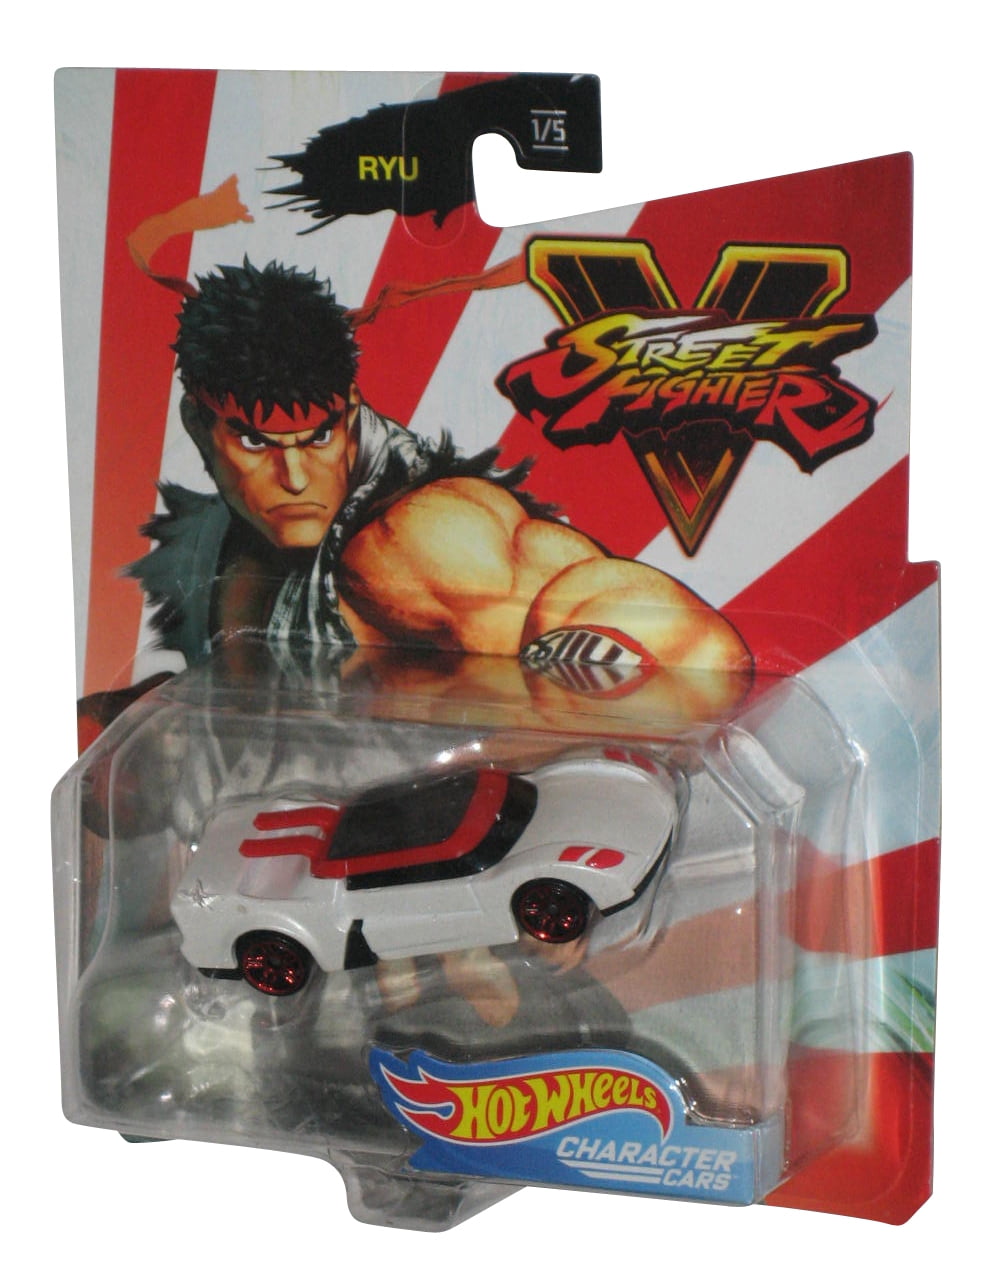 Hot Wheels Character Cars Ryu Street Fighter BRAND NEW & SEALED 